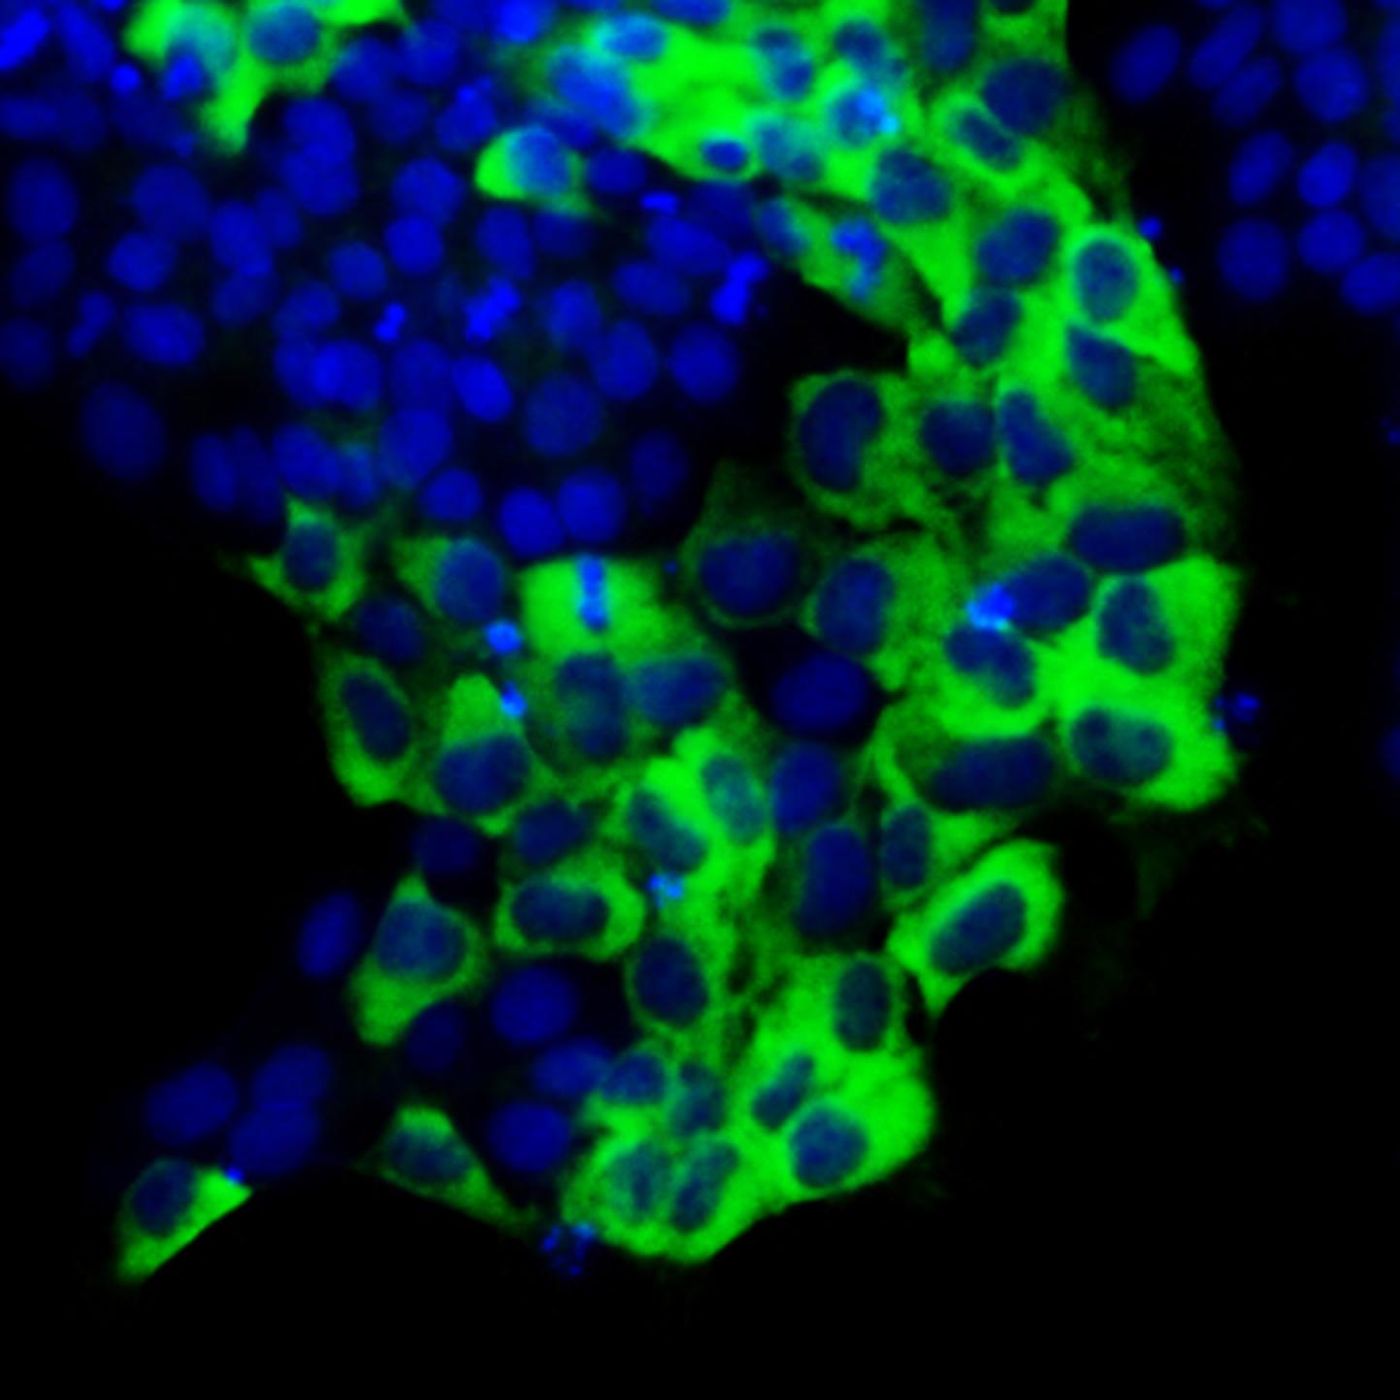 The protein TAZ (green) in the cytoplasm (the region outside of the nuclei, blue) promotes the self-renewal of human embryonic stem cells. / Credit: Xingliang Zhou/Ying Lab, USC Stem Cell